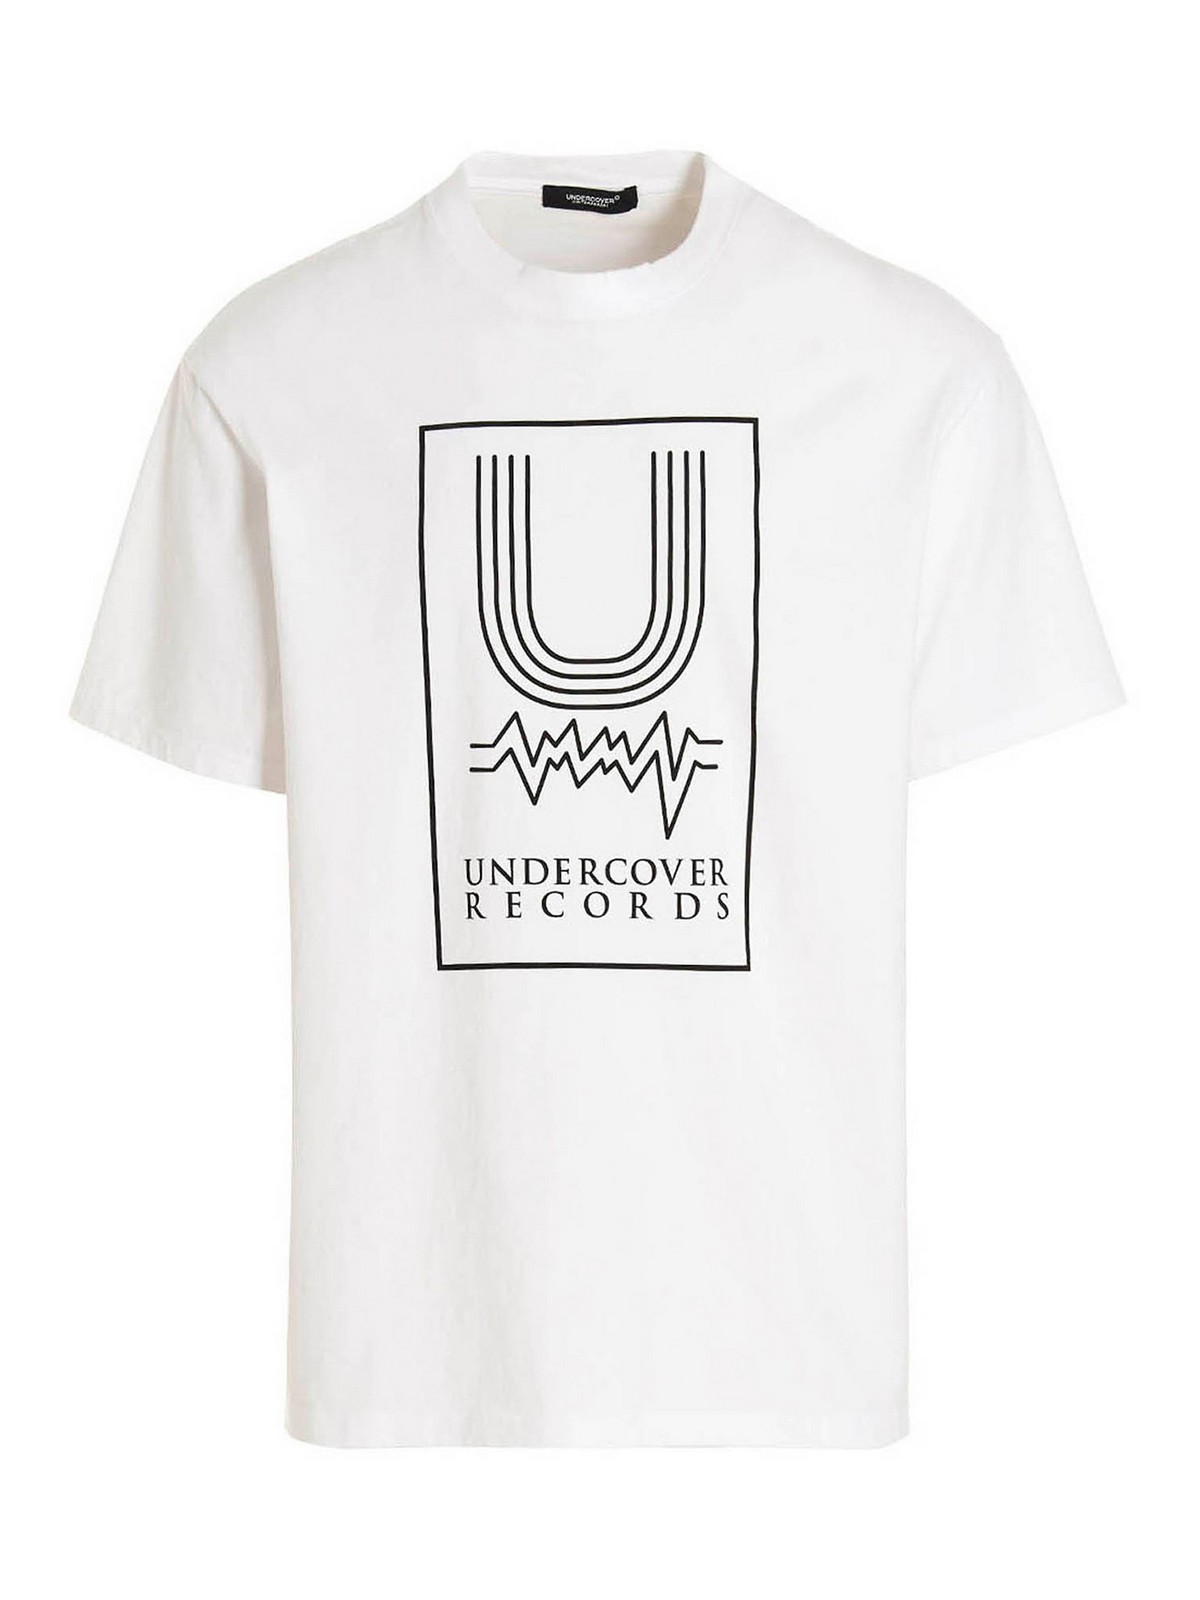 Tシャツ Undercover - Tシャツ - 白 - UC2B9805WHITE | THEBS [iKRIX]